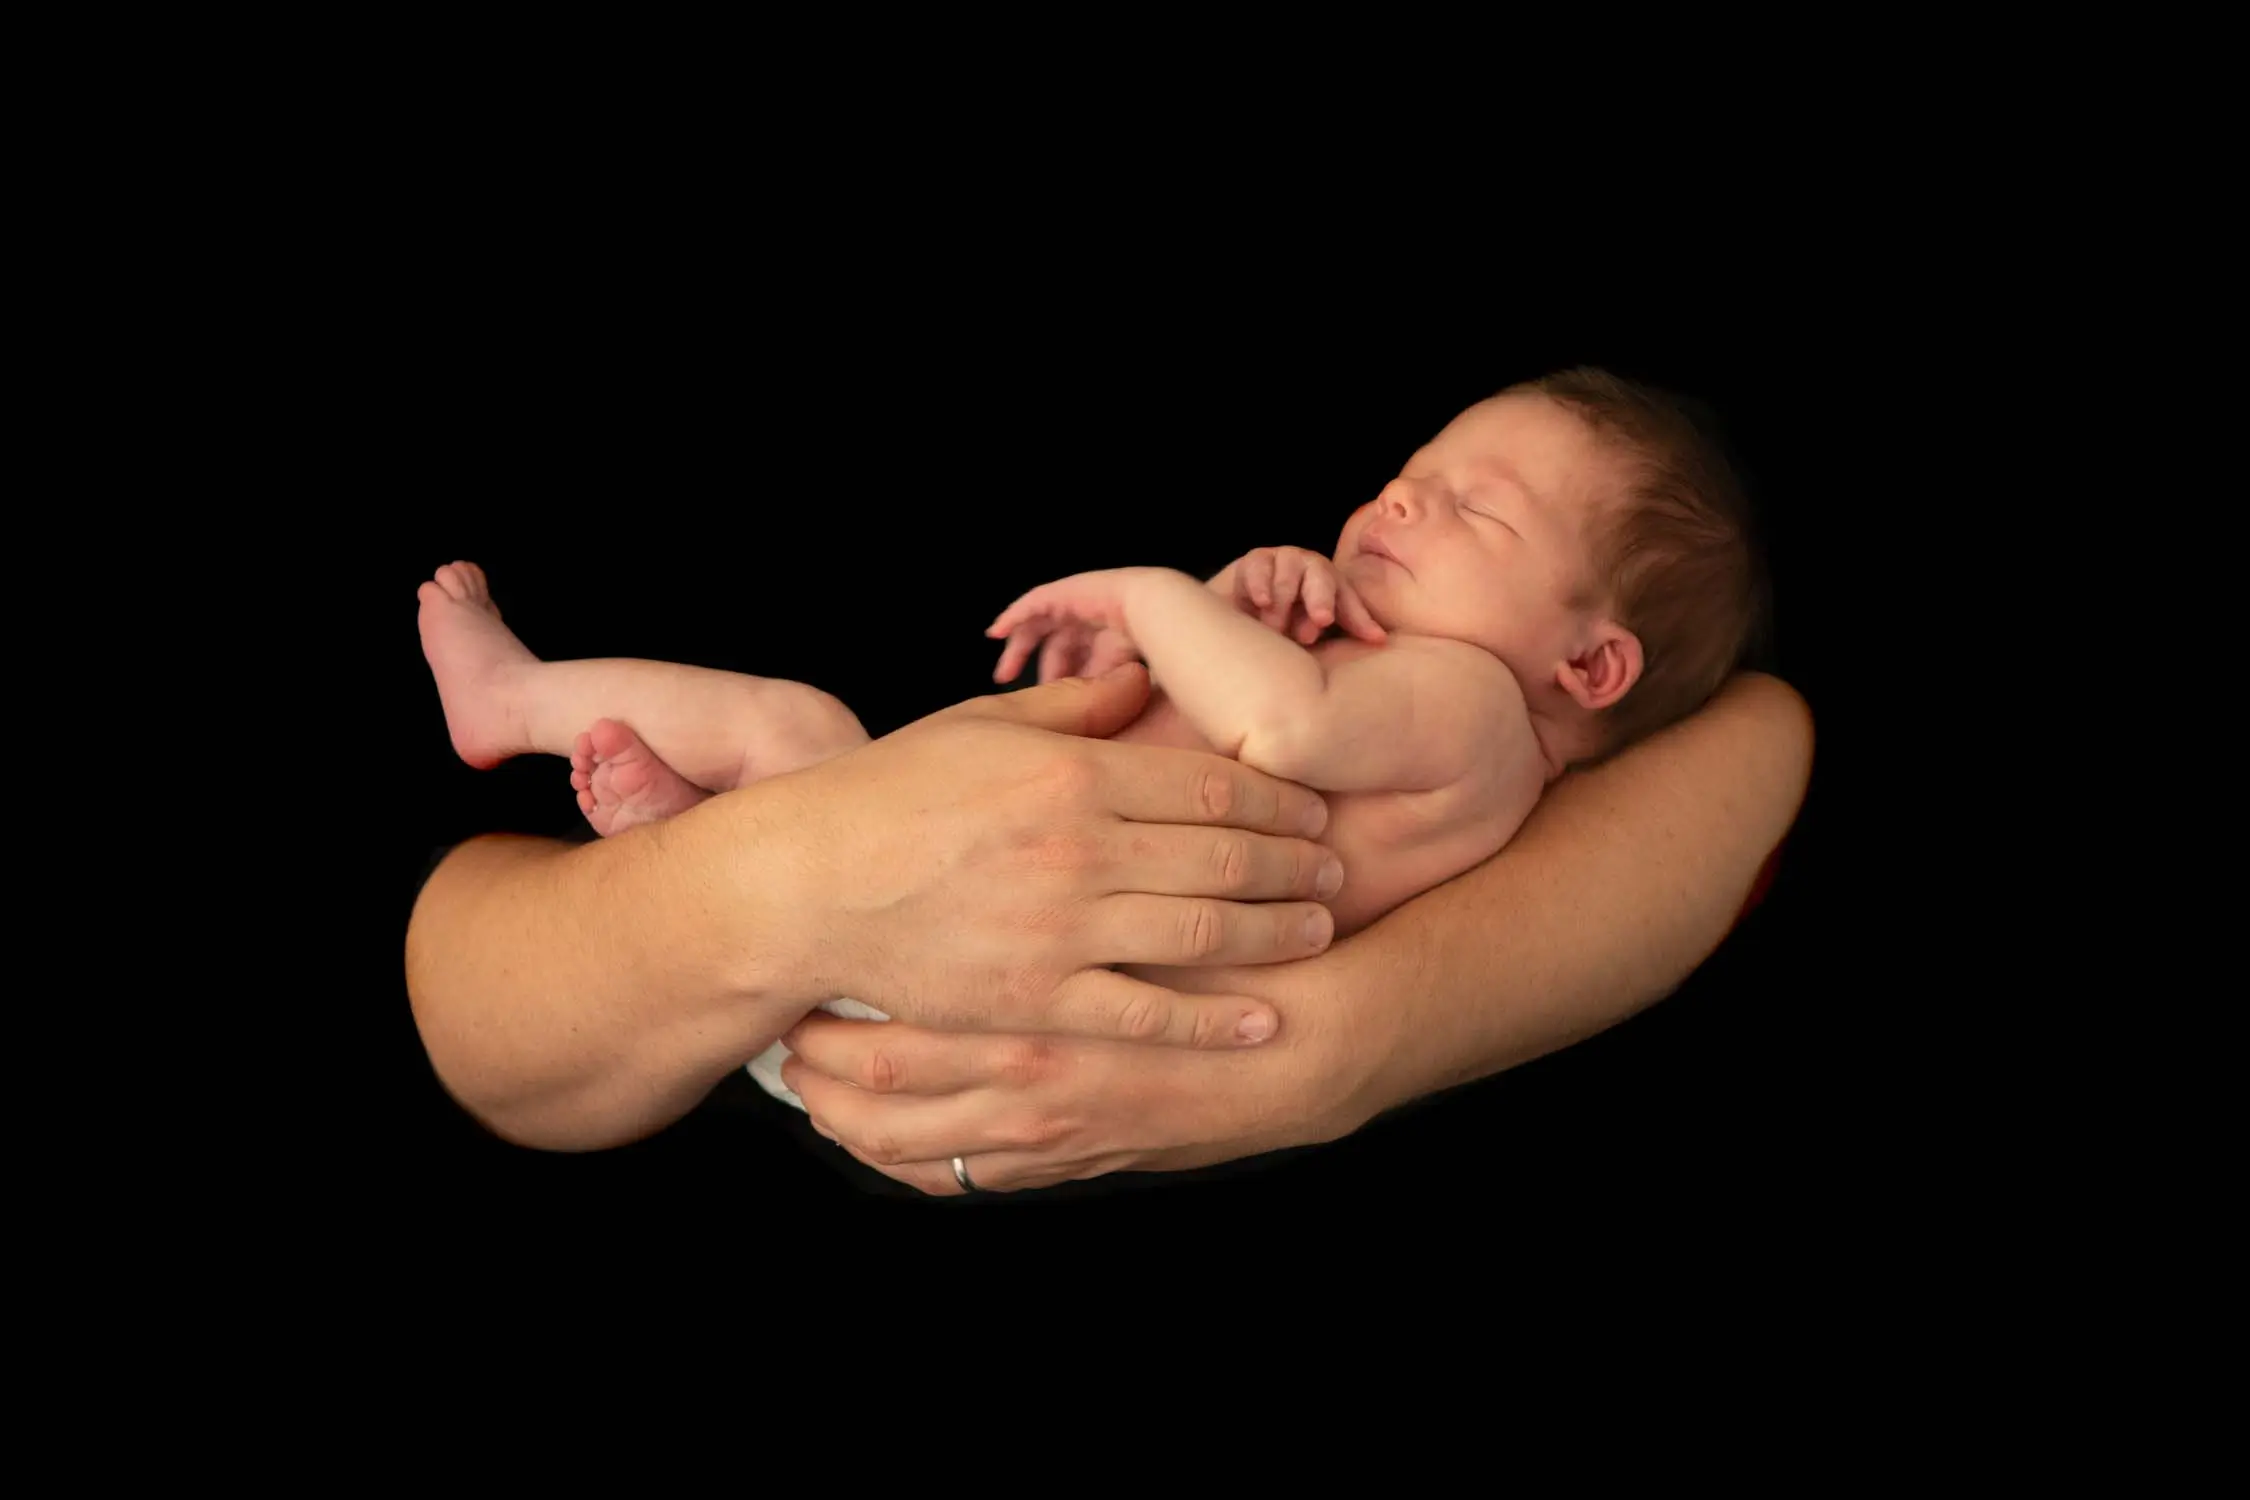 Newborn in their father's arms